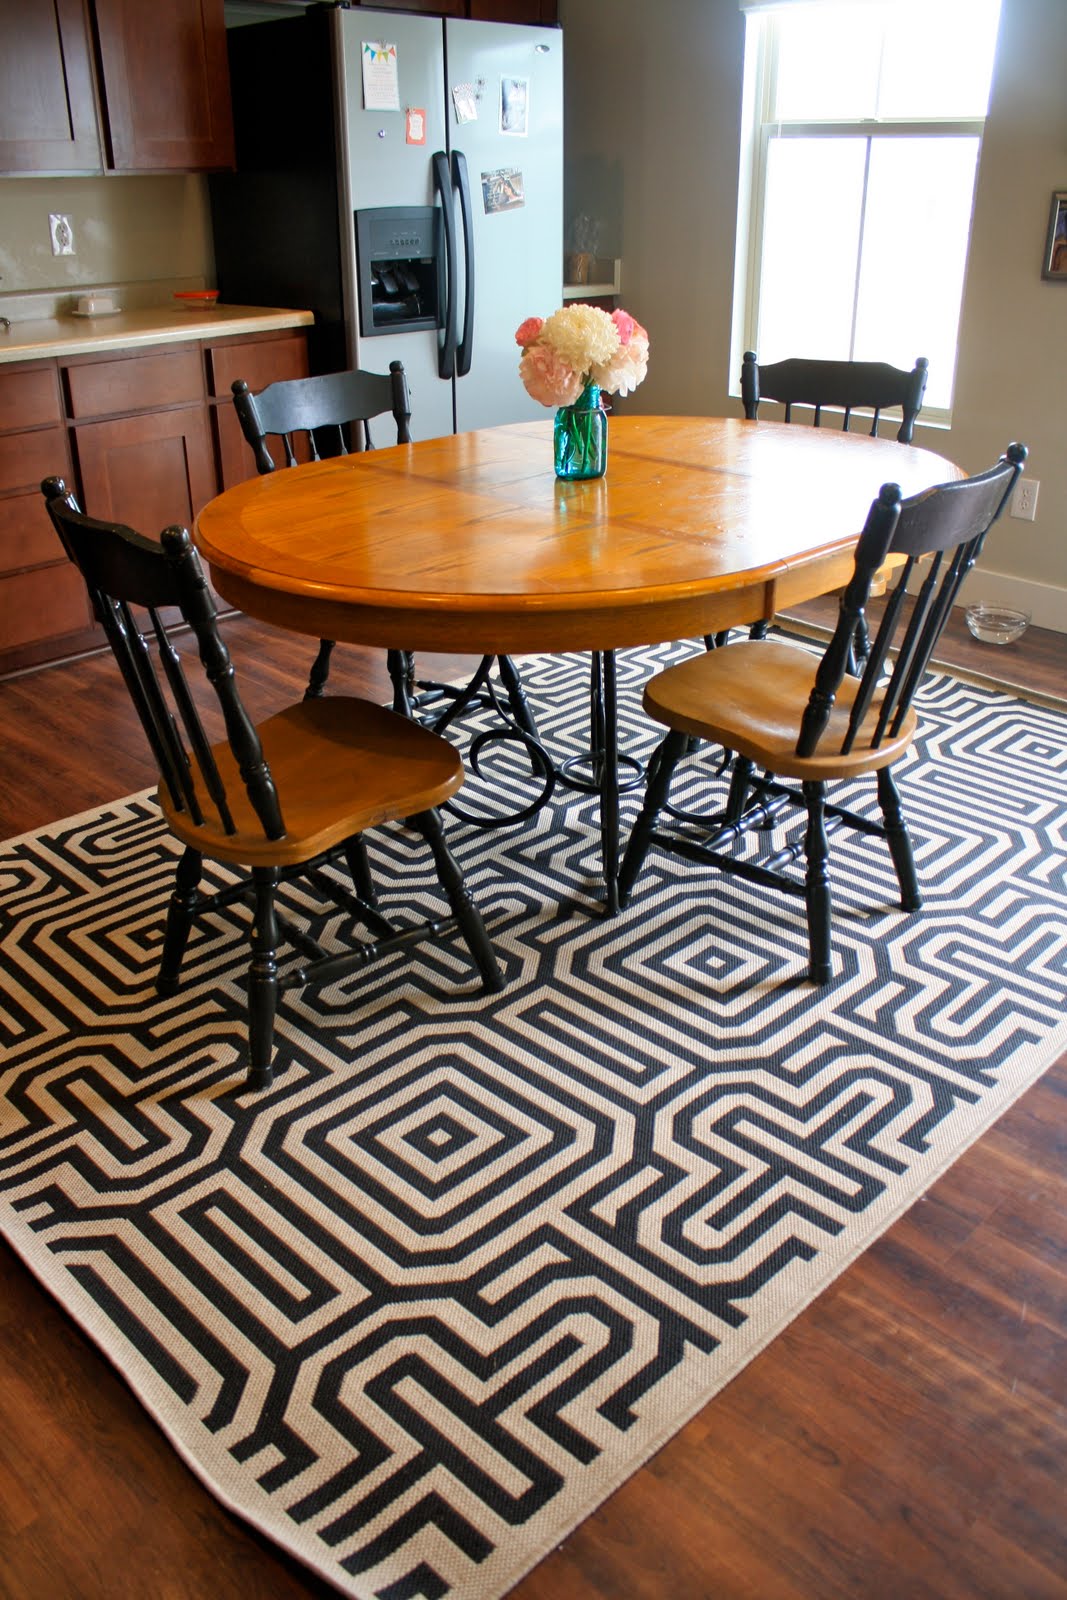 A rug that brings life and vitality into an otherwise simplistic dining room